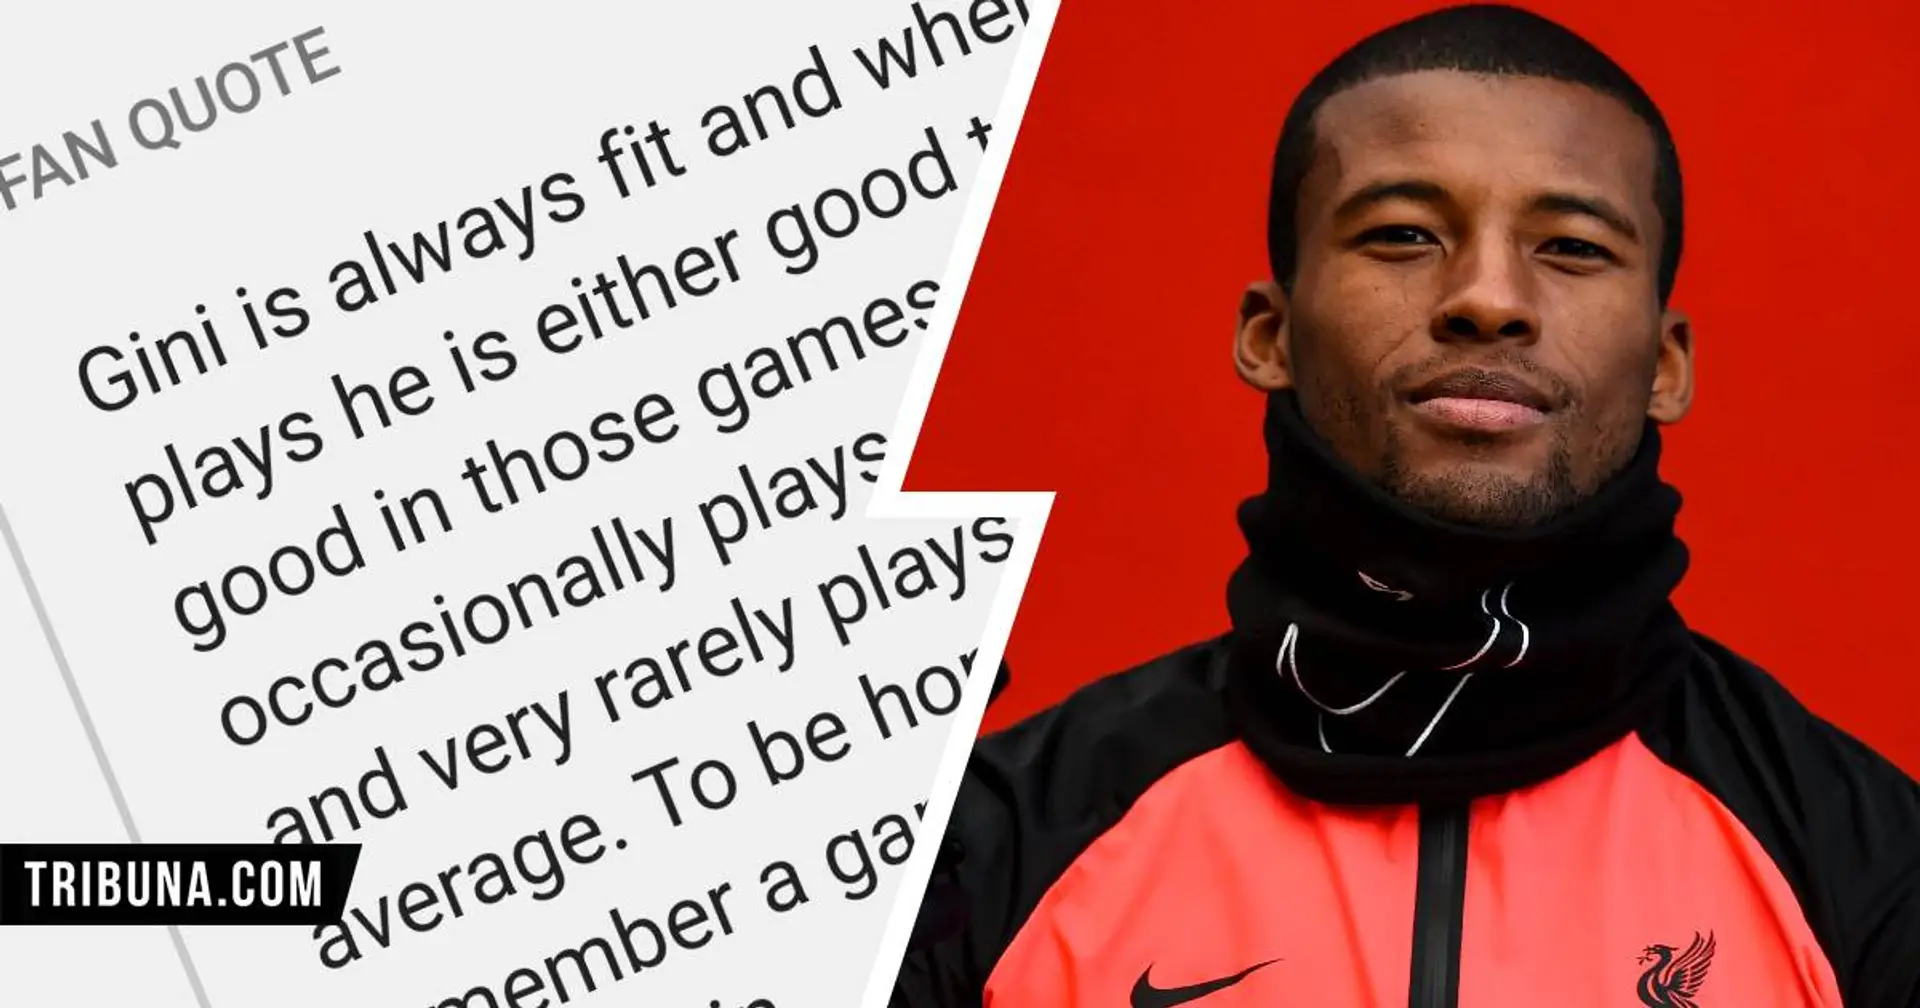 'I wasn't upset when Emre Can left, but Gini leaving would be a big blow': Fan explains why he wants Wijnaldum to stay